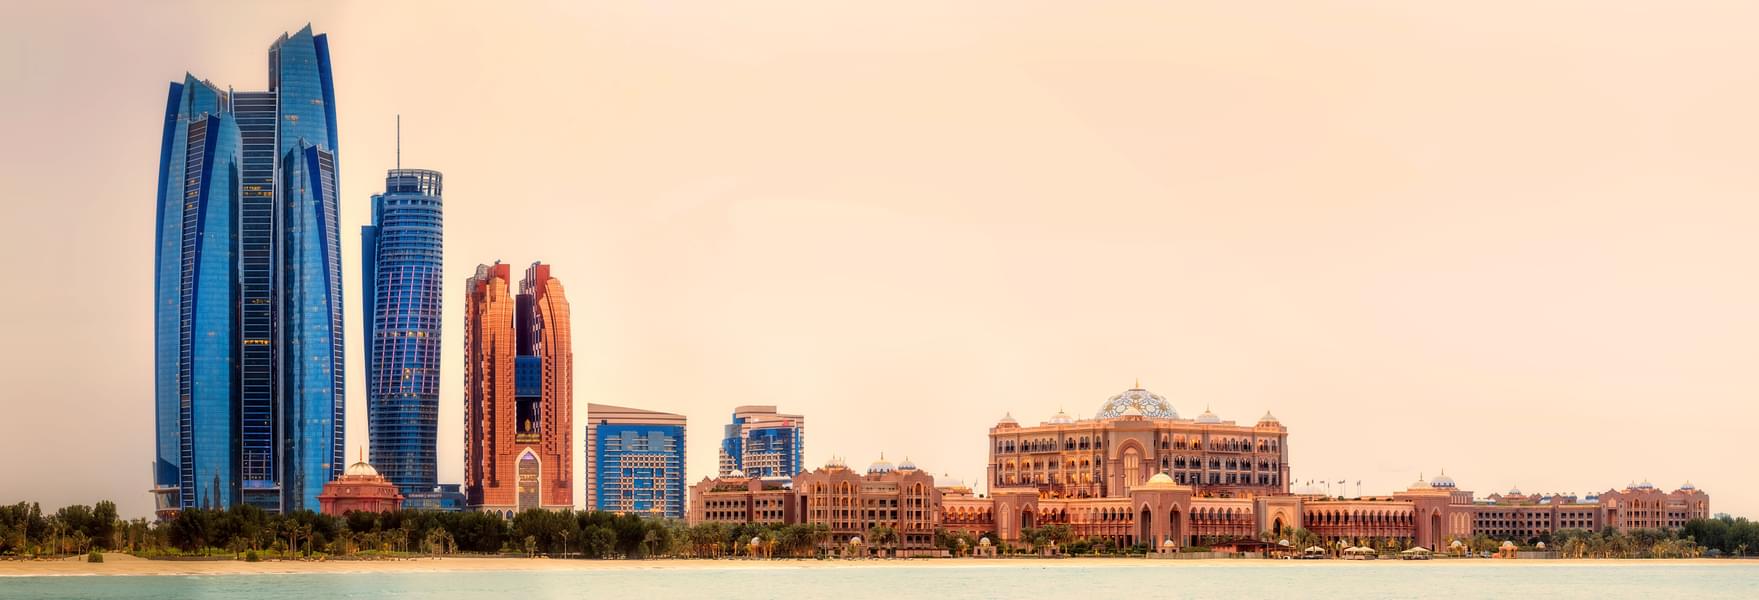 High adrenaline Games at the Emirates Palace: